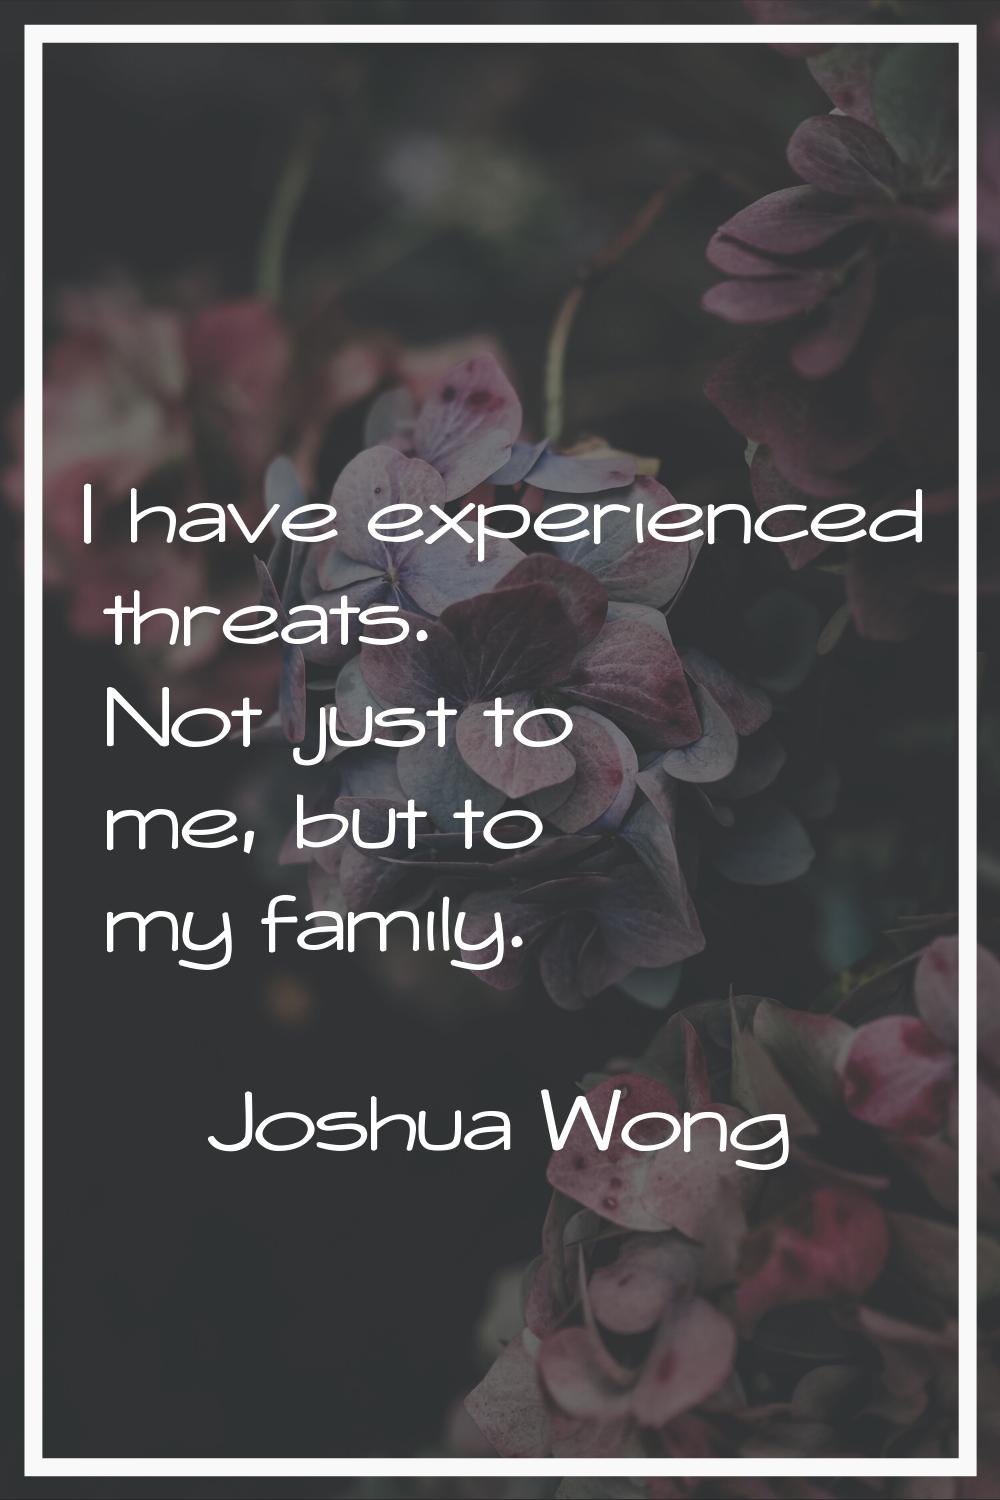 I have experienced threats. Not just to me, but to my family.